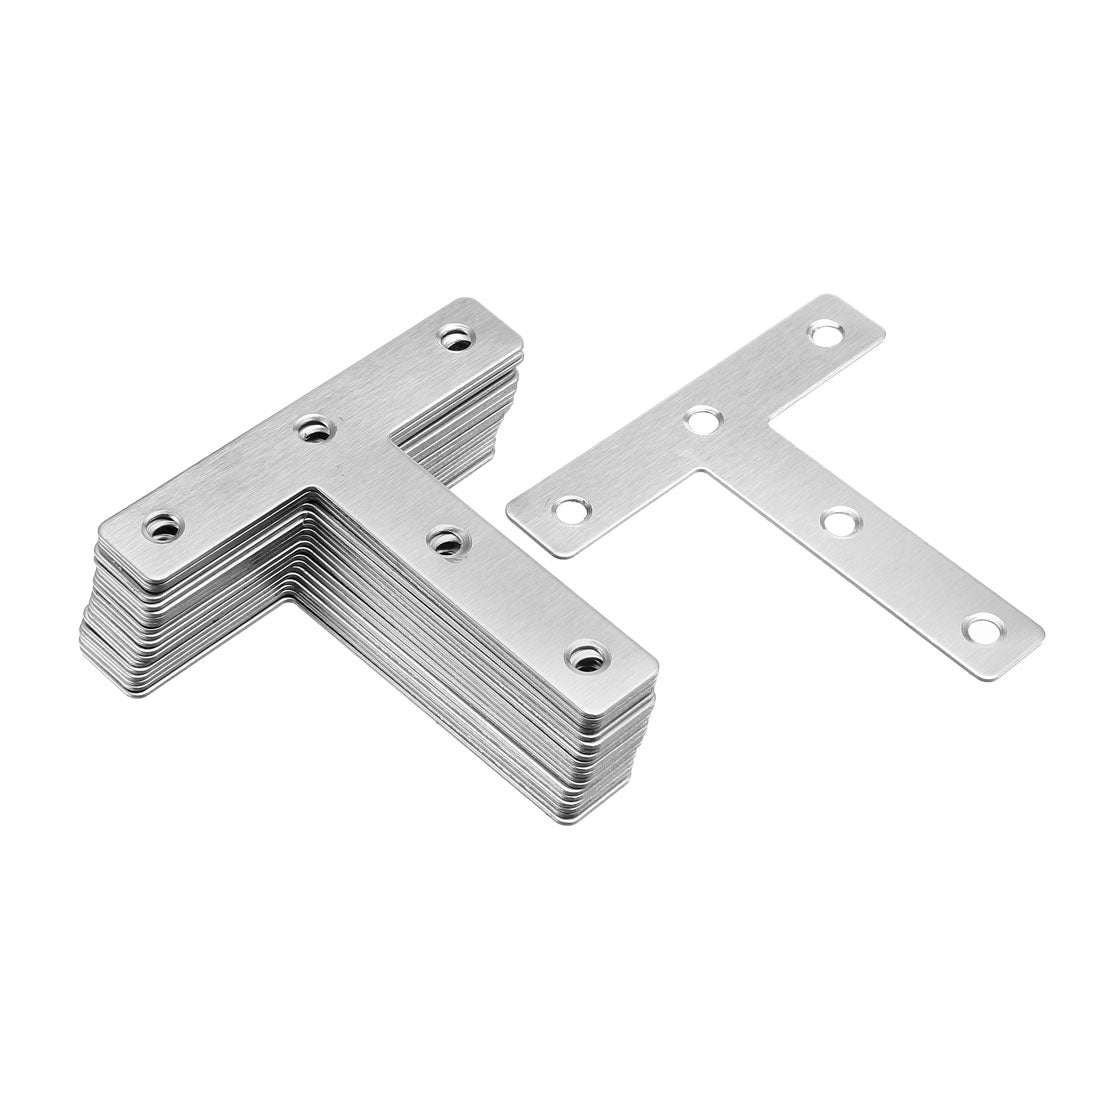 uxcell Uxcell Flat T Shape Repair Mending Plate, 80mmx80mm, Stainless steel Joining Bracket Support Brace, 20 pcs